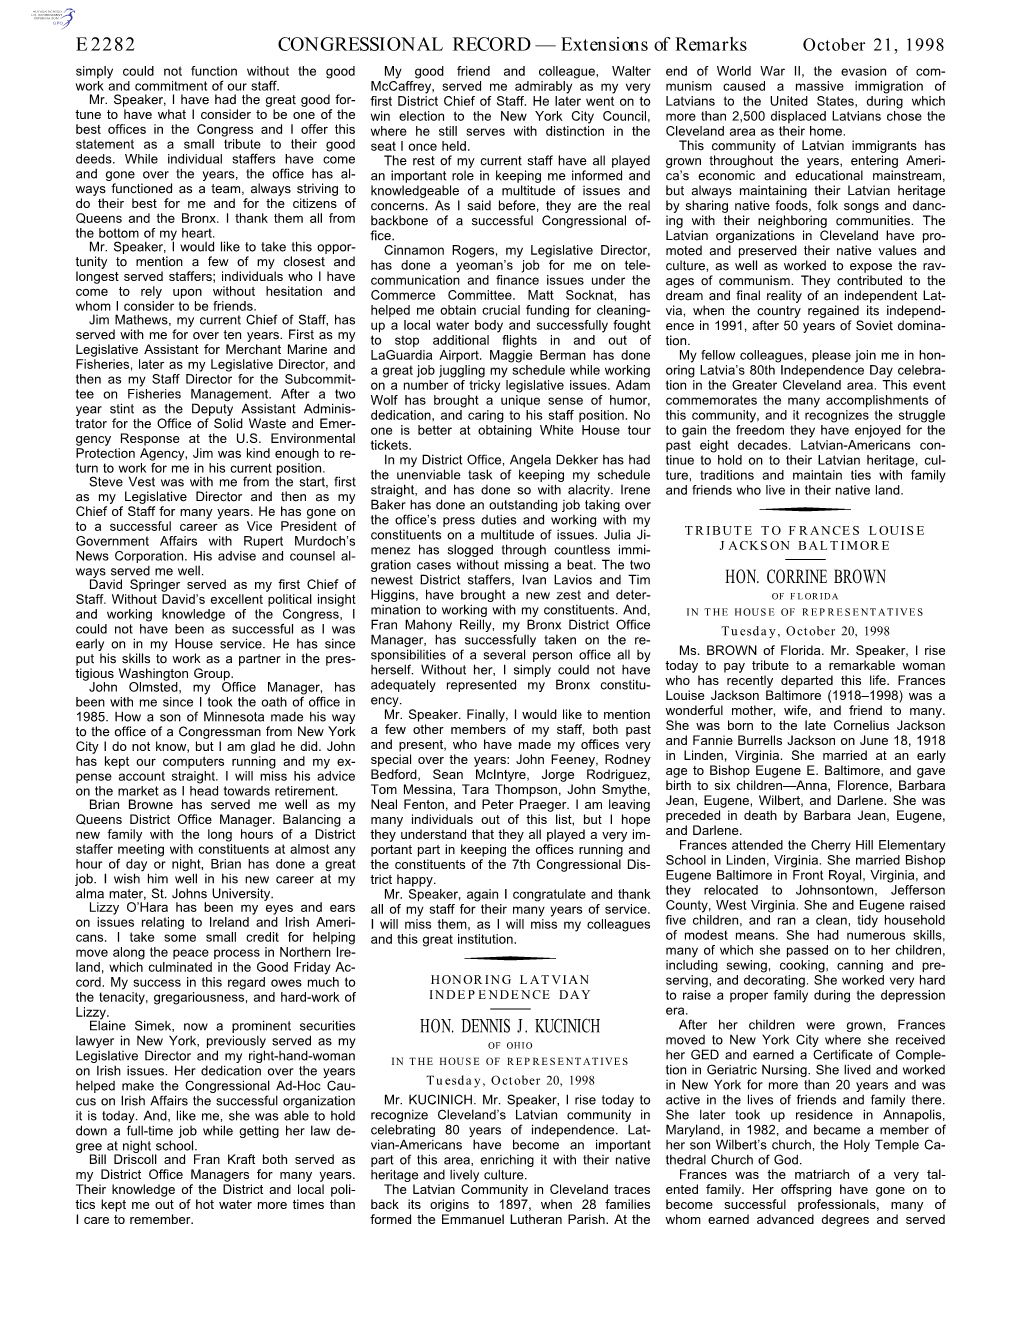 CONGRESSIONAL RECORD— Extensions of Remarks E2282 HON. DENNIS J. KUCINICH HON. CORRINE BROWN